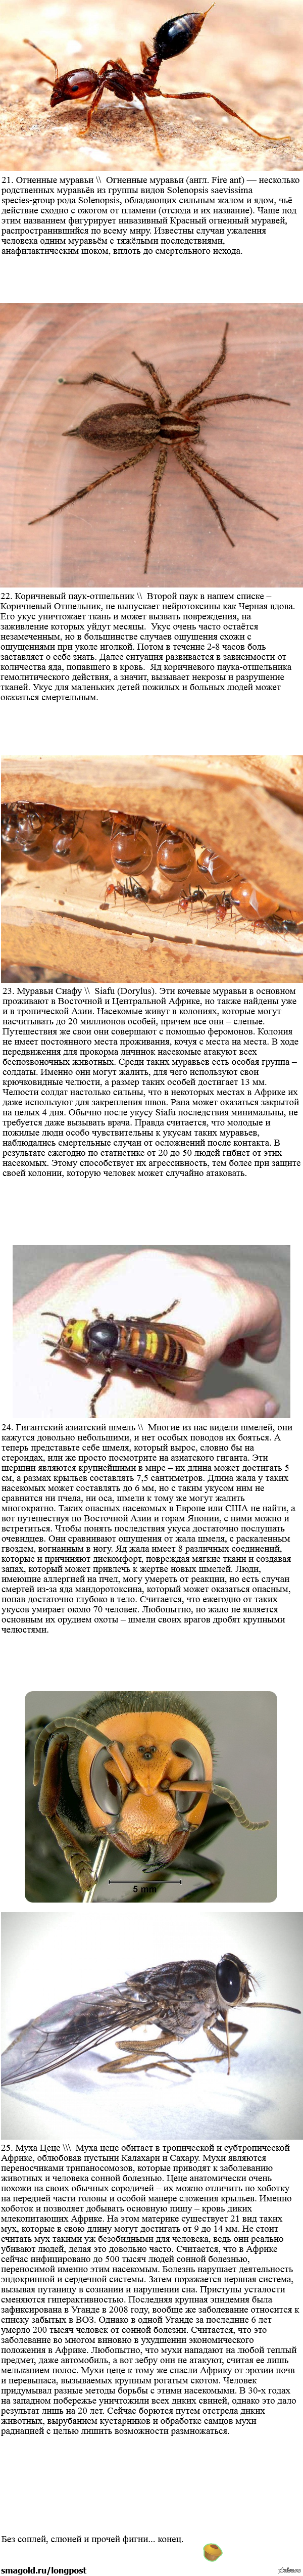 25 most dangerous insects - Longpost, Insects, Kill IT with Fire